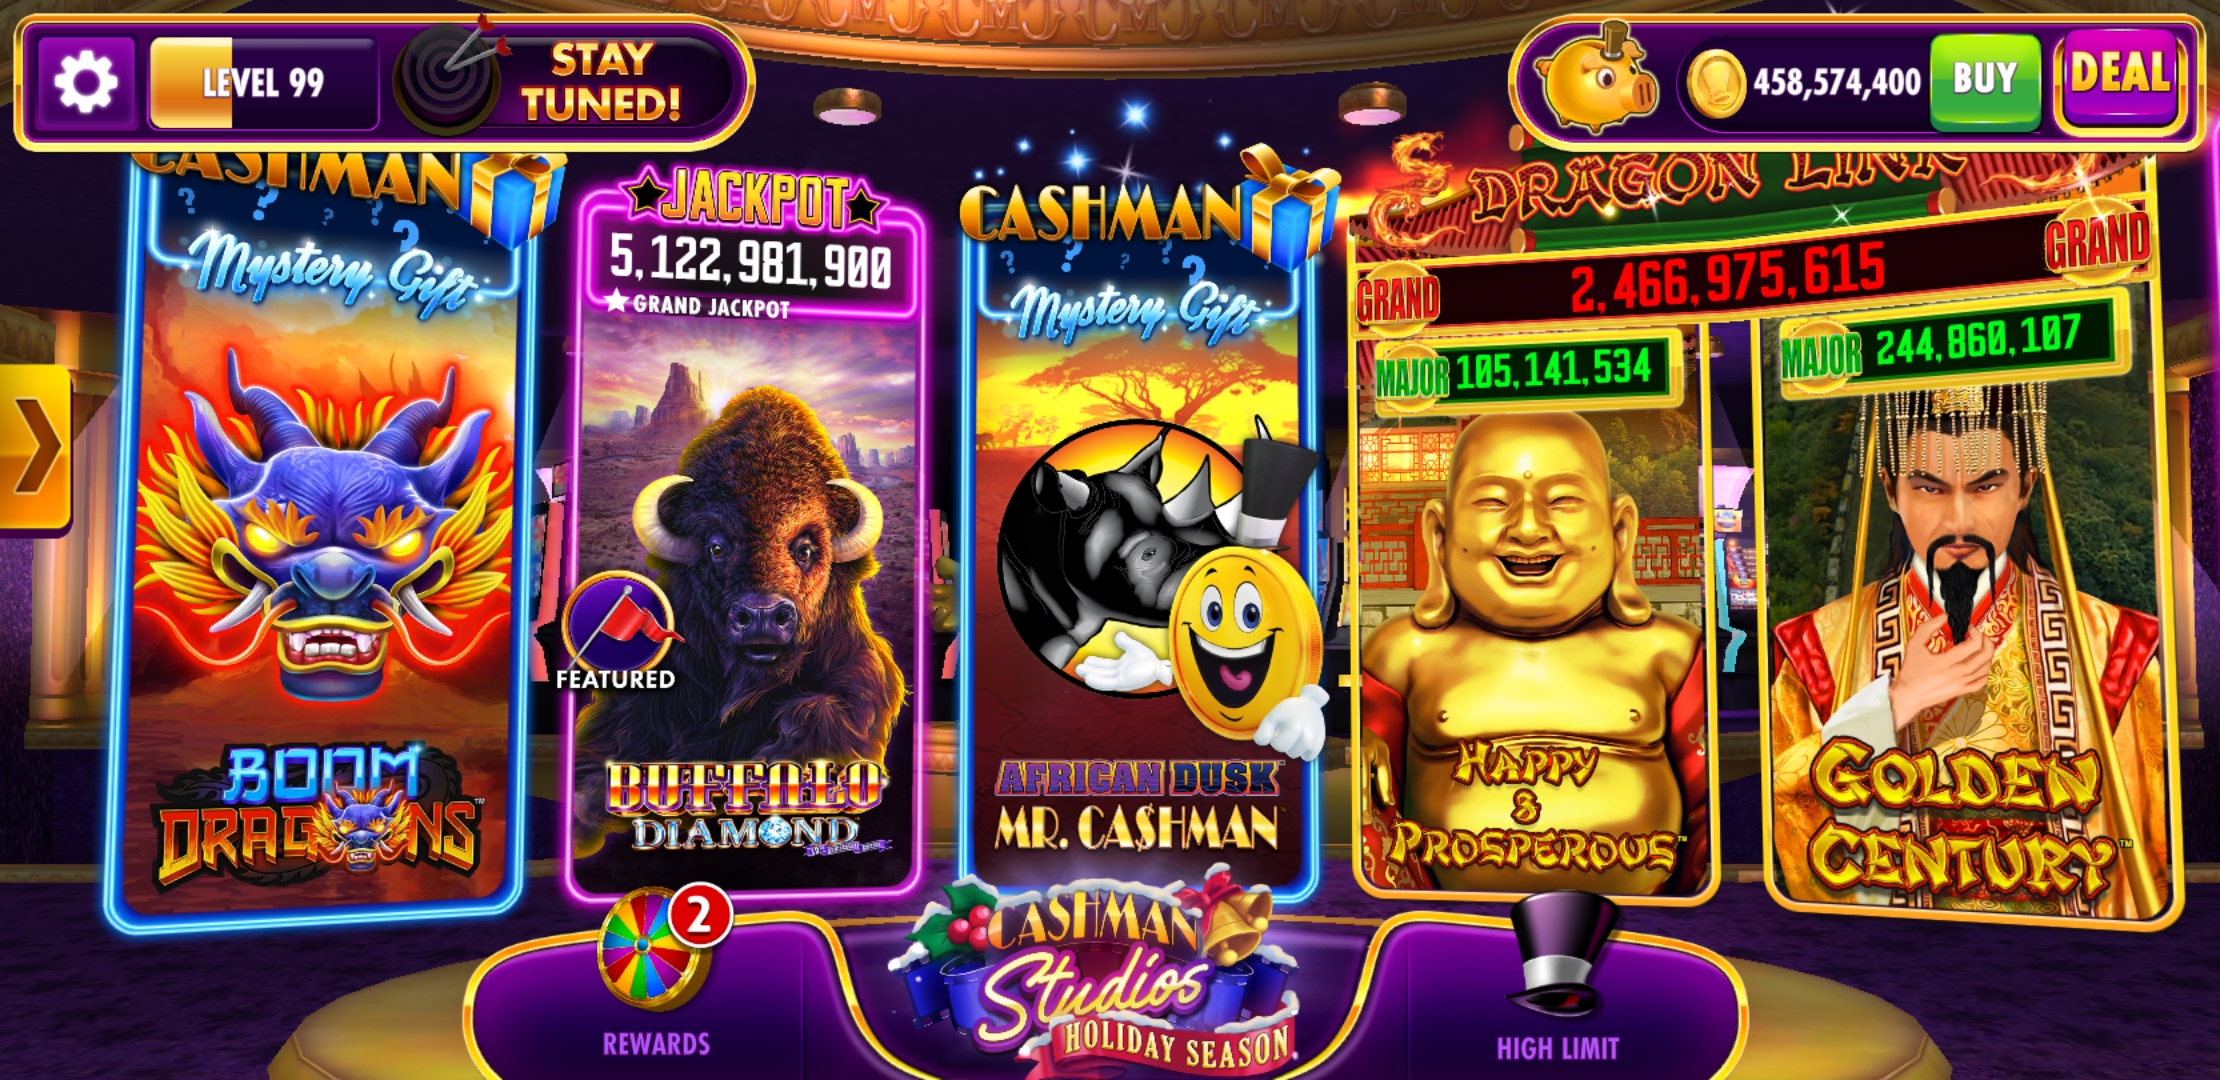 Real money mobile casino canada players